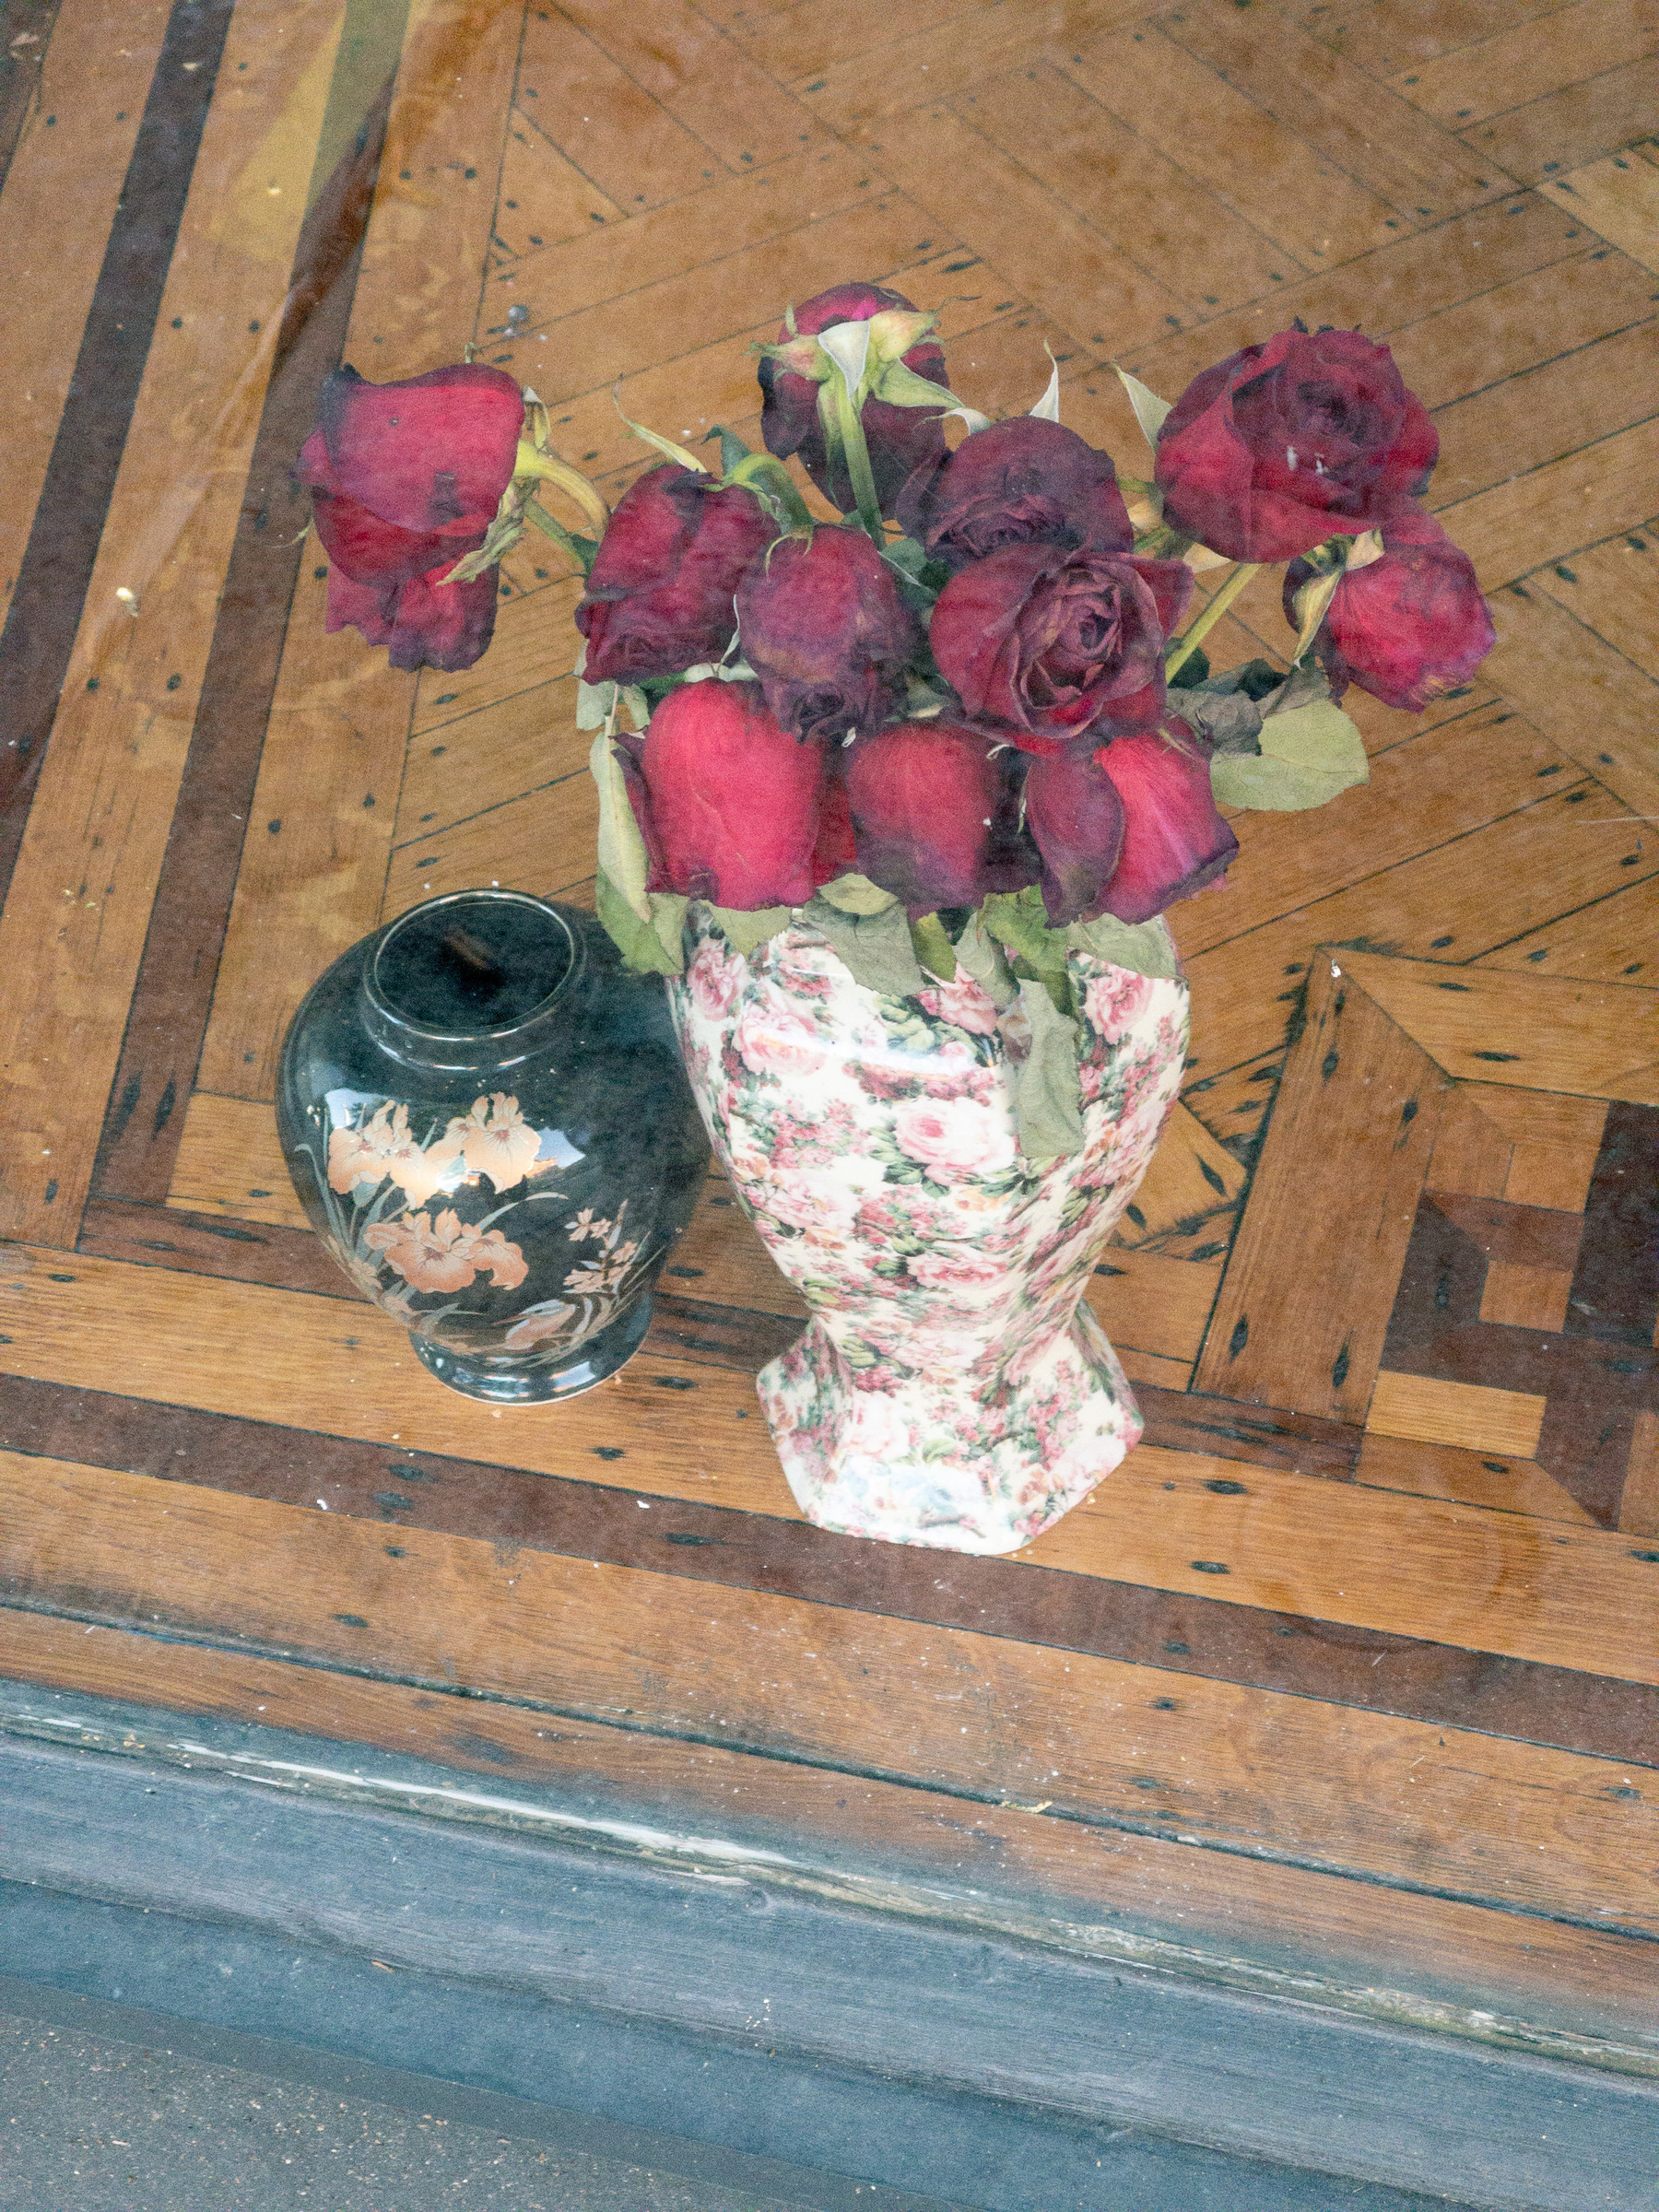 small vase and large floral pattern vase with wilting roses sitting on wood inlay display surface in a shop window